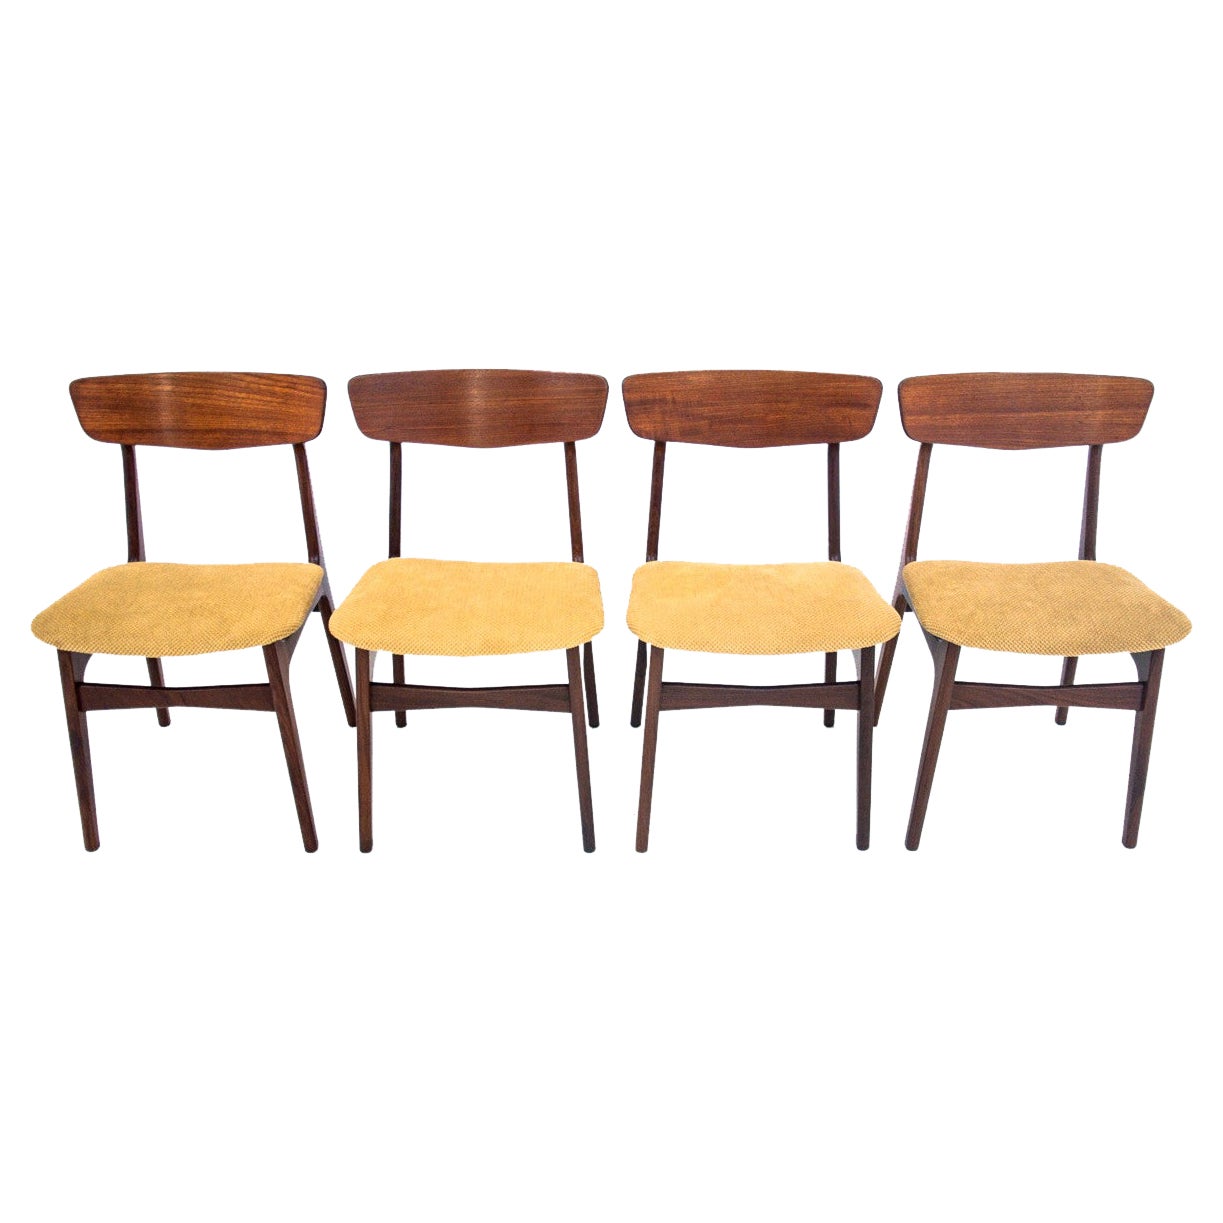 Set of 4 Chairs, Denmark, 1960s, After Renovation